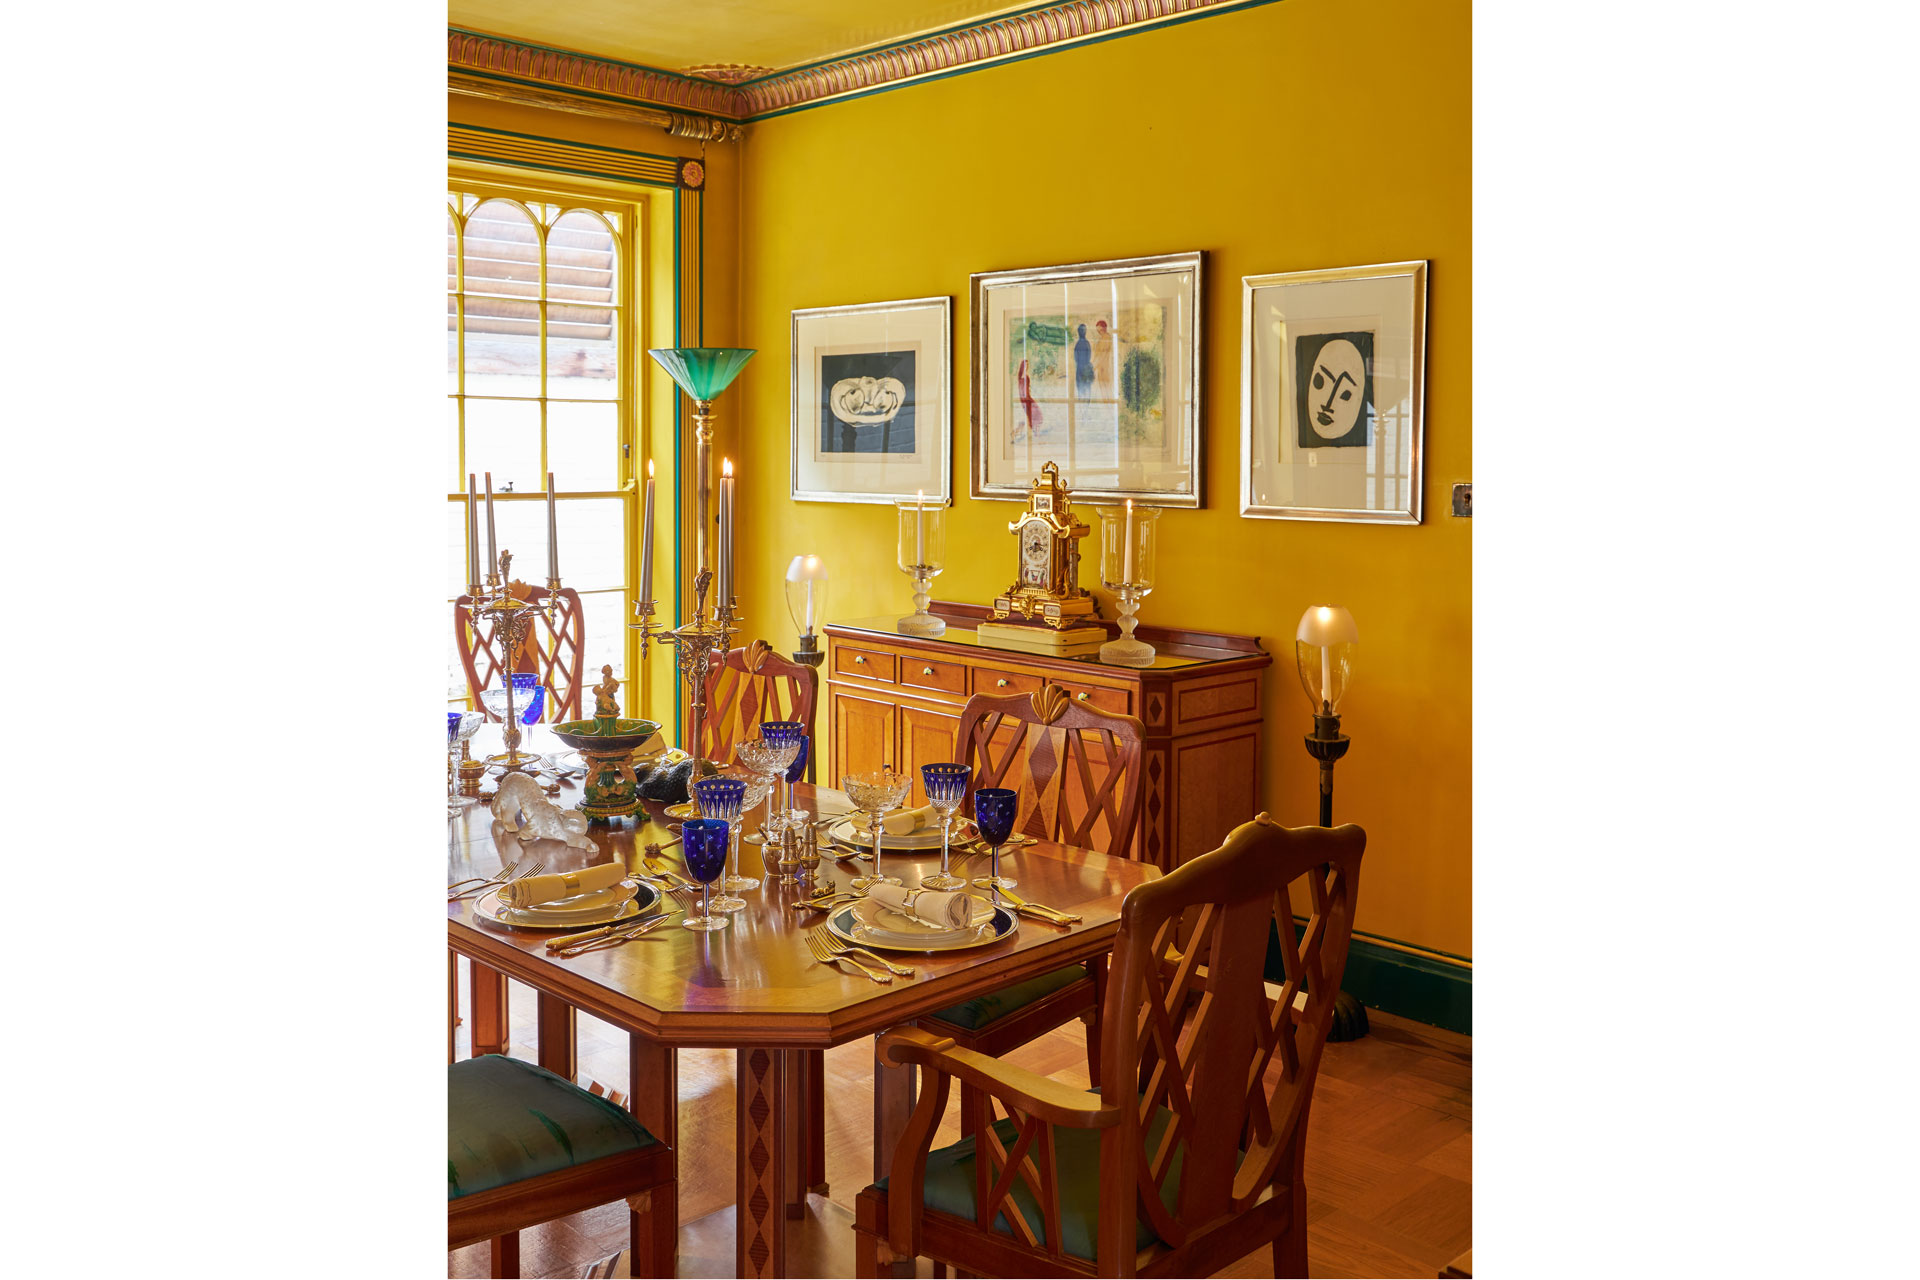 Sunflower=yellow dining room with polished wooden furniture and intricate ceiling cornicing.